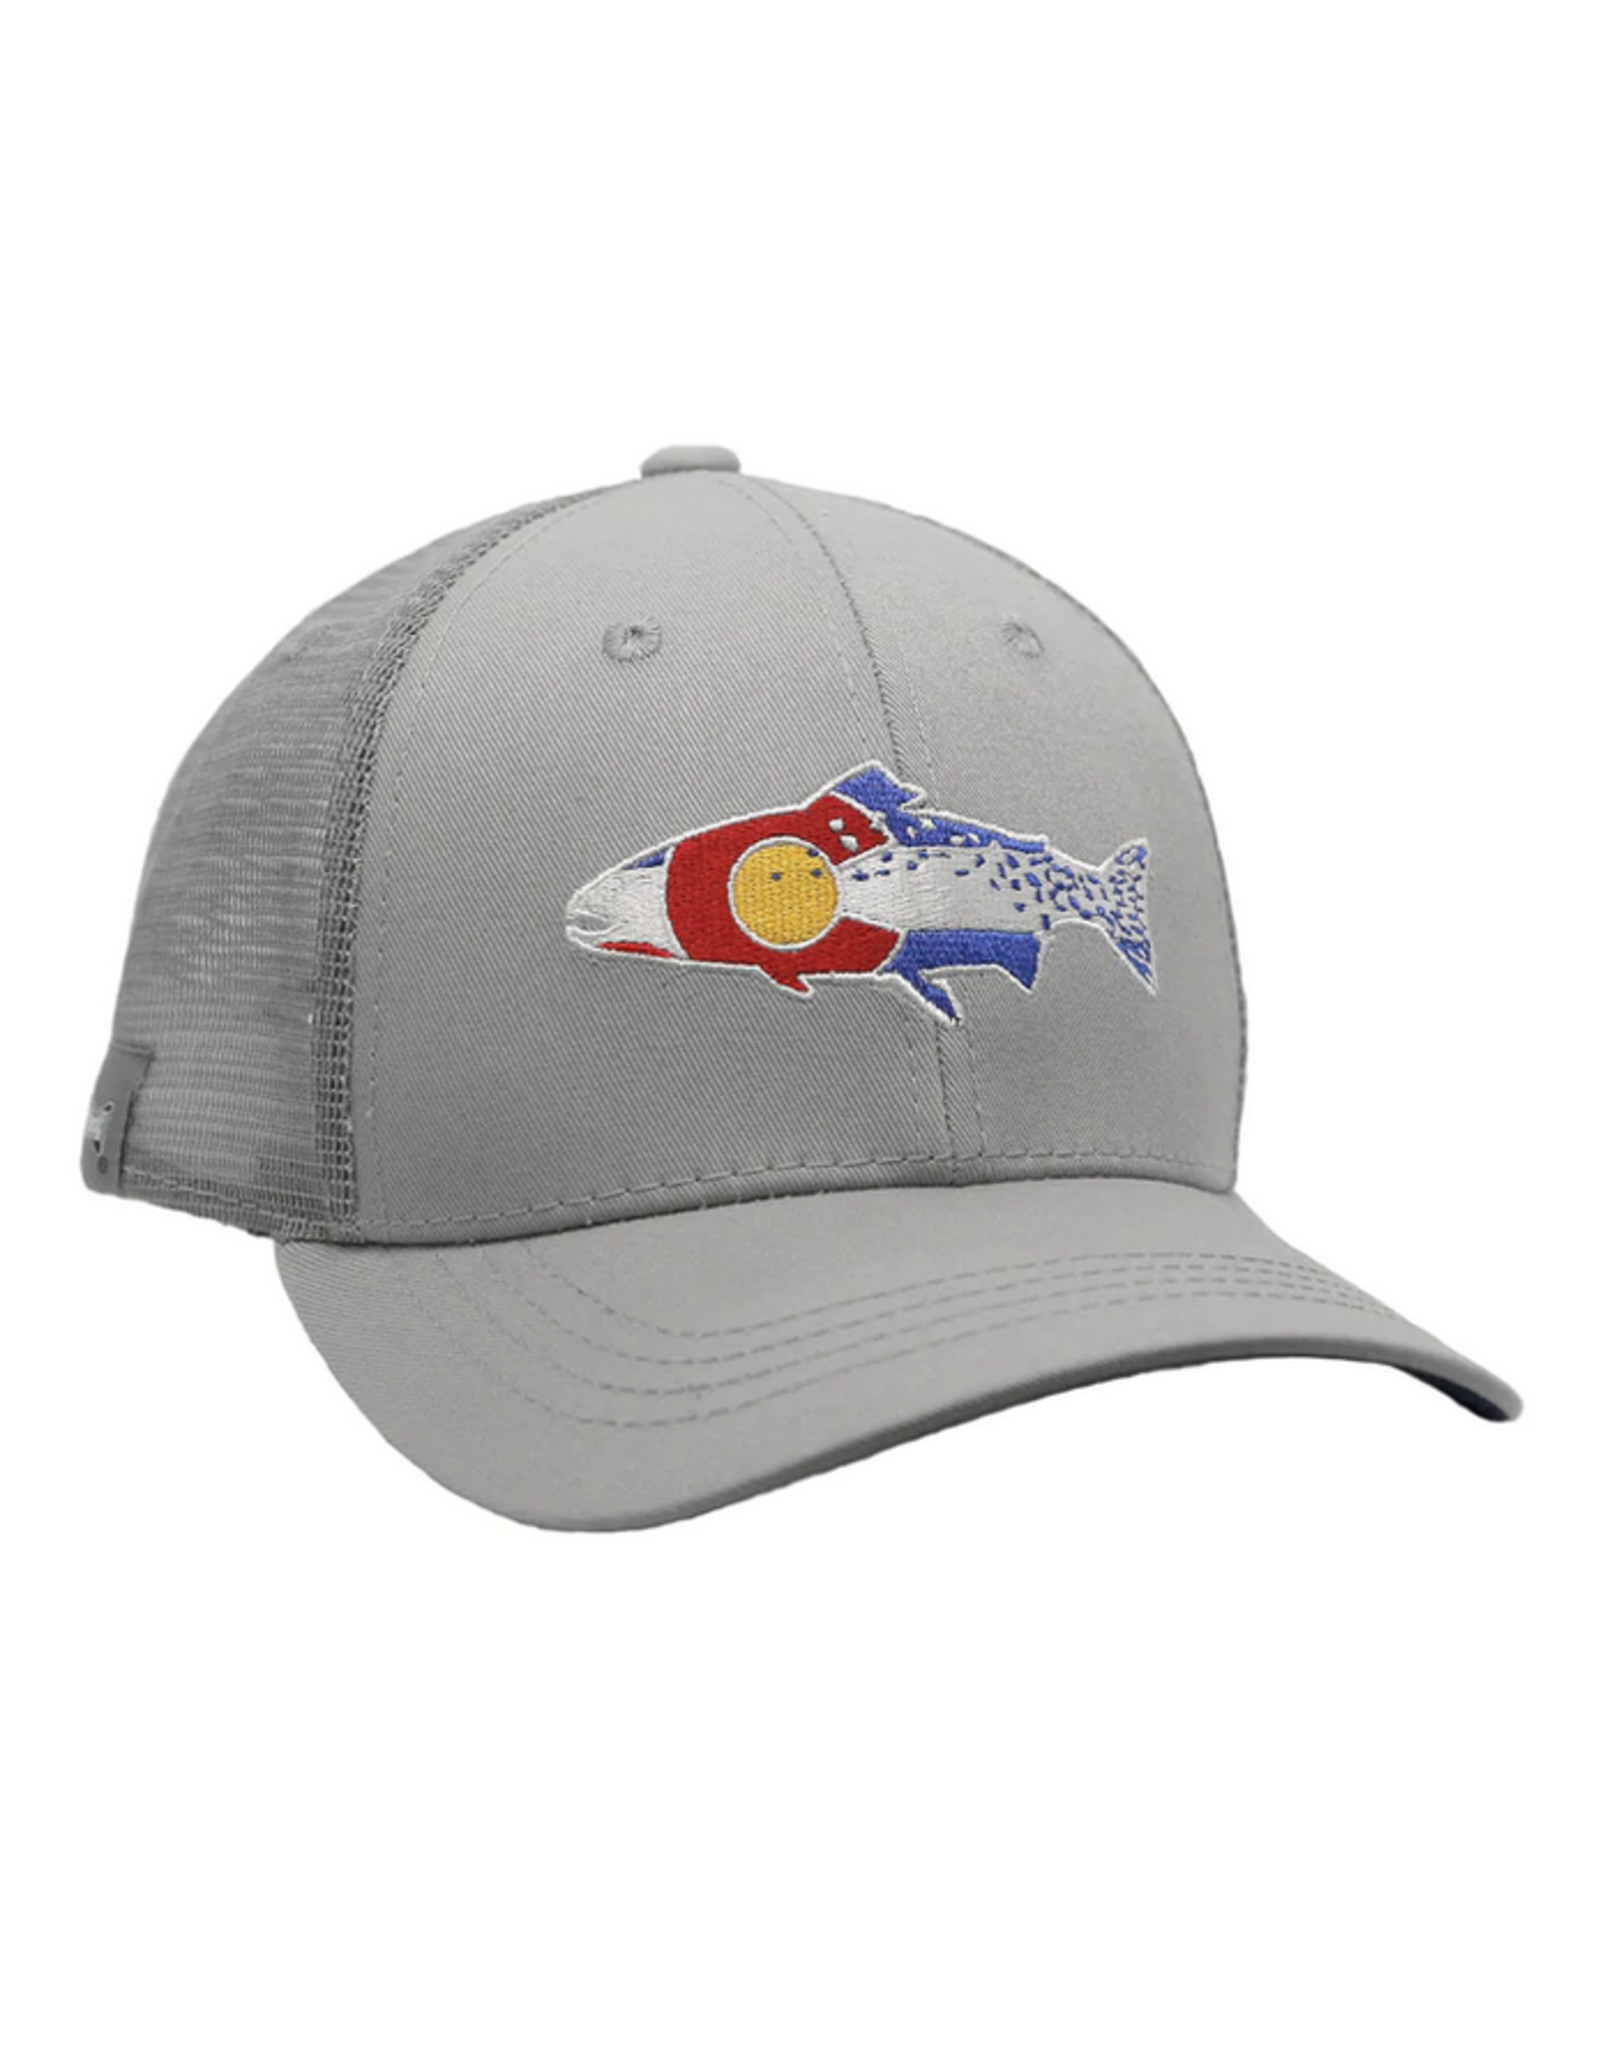 Rep Your Water Rep Your Water Colorado Cutthroat Hat (Low-Profile)